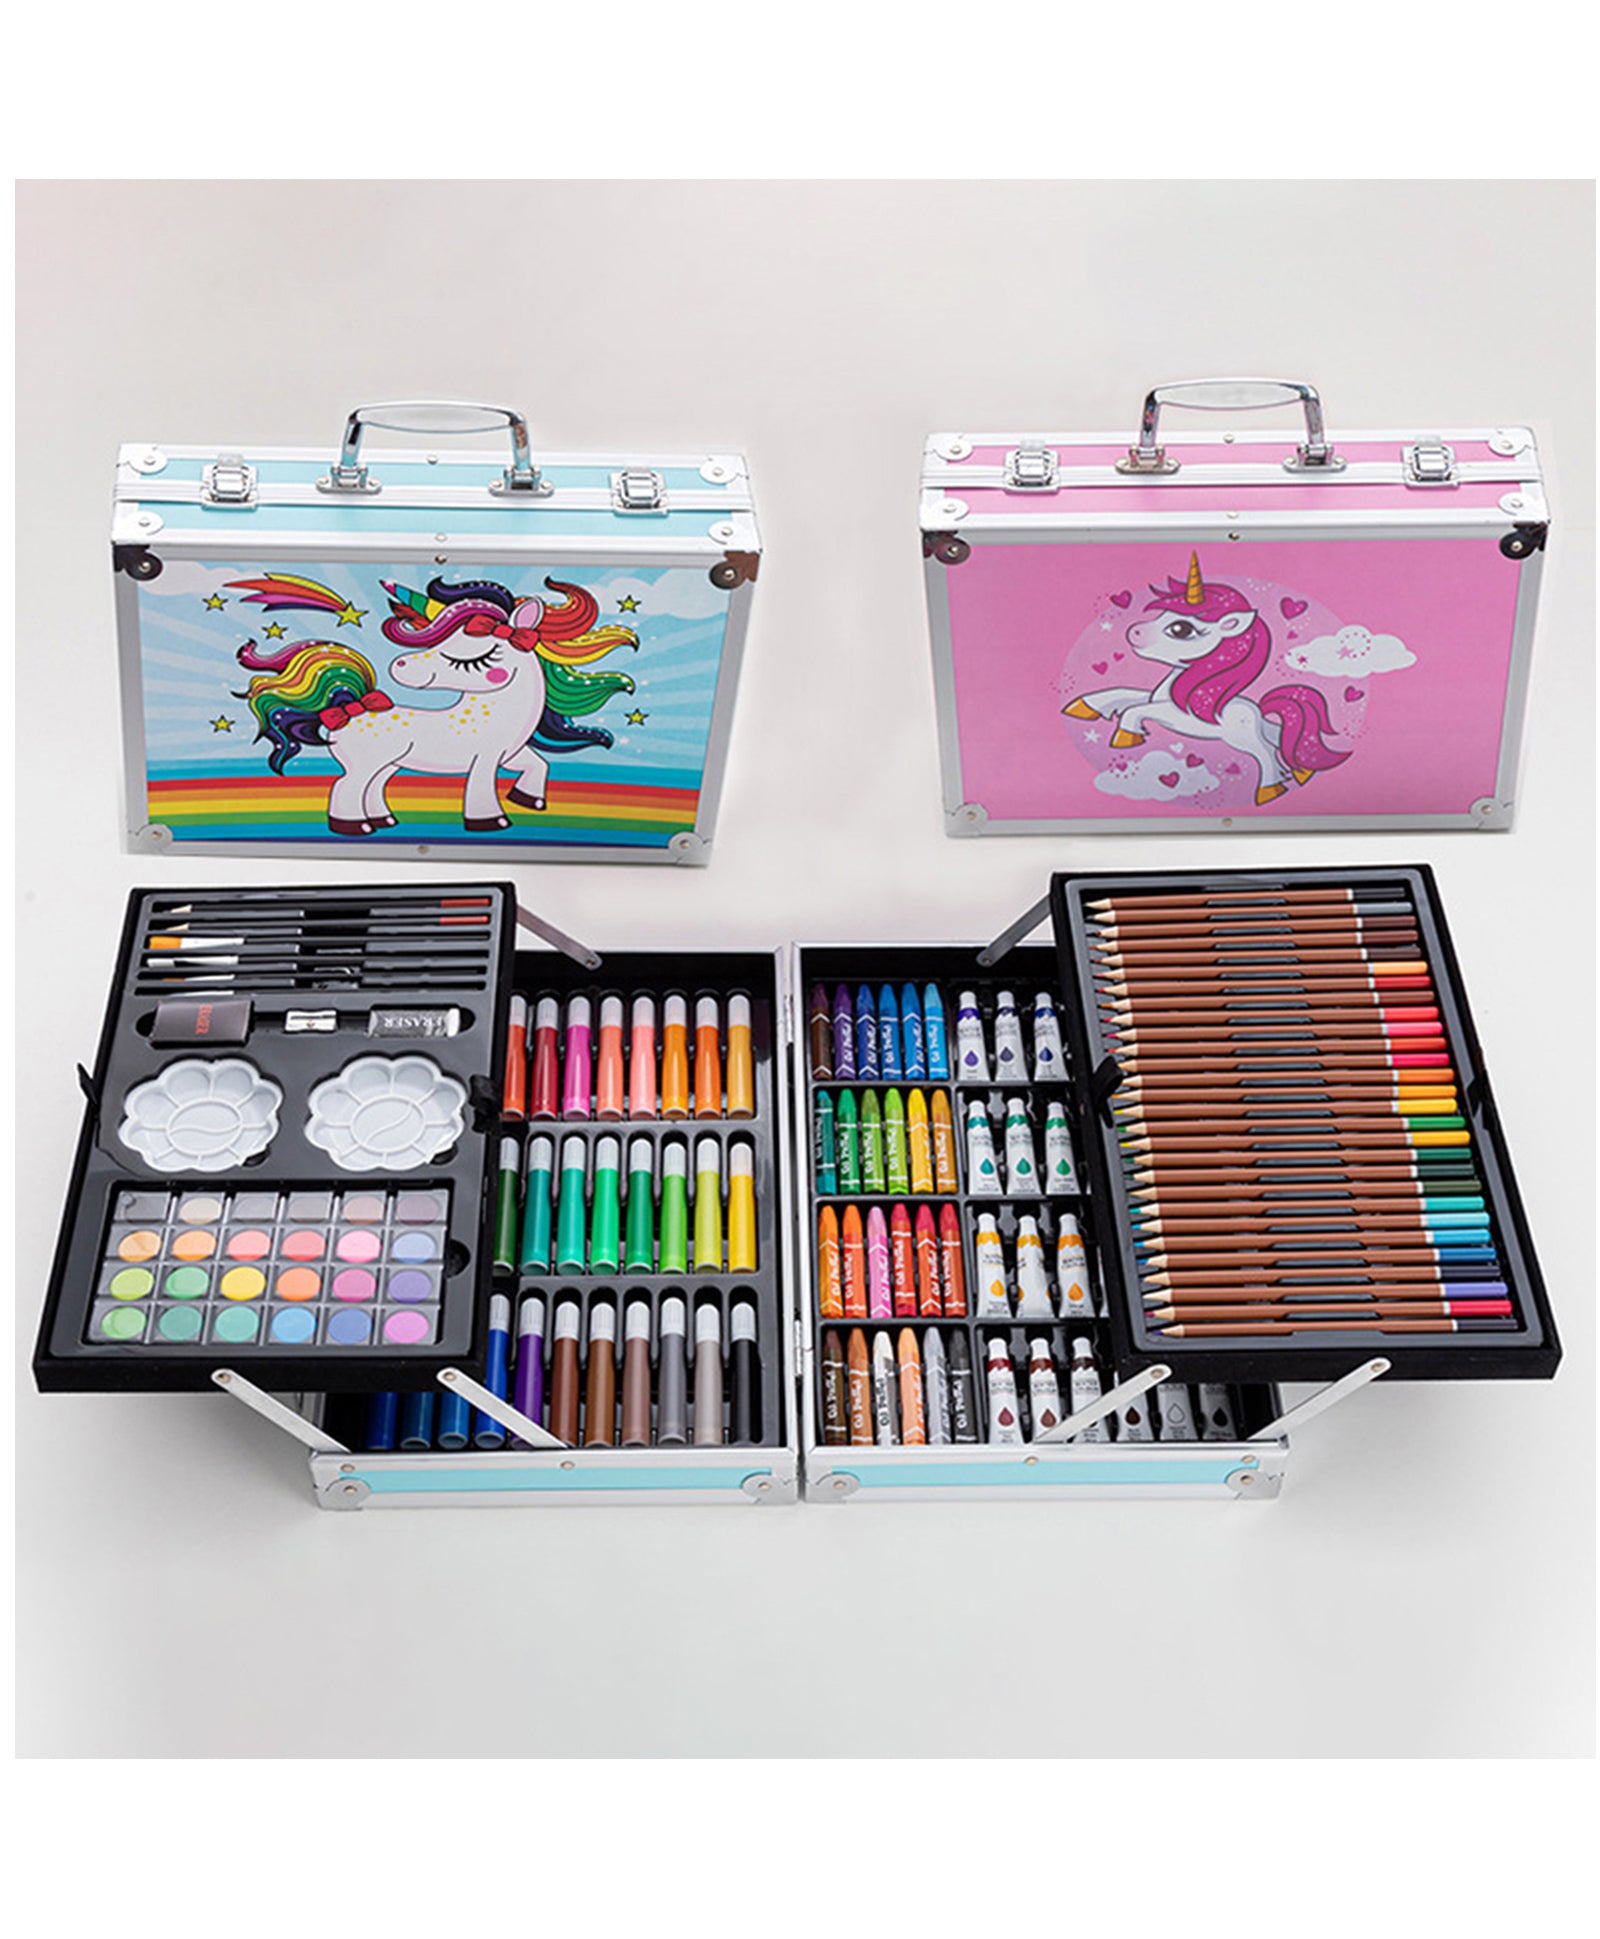 UNICORN DRAWING SUITCASE FOR KIDS